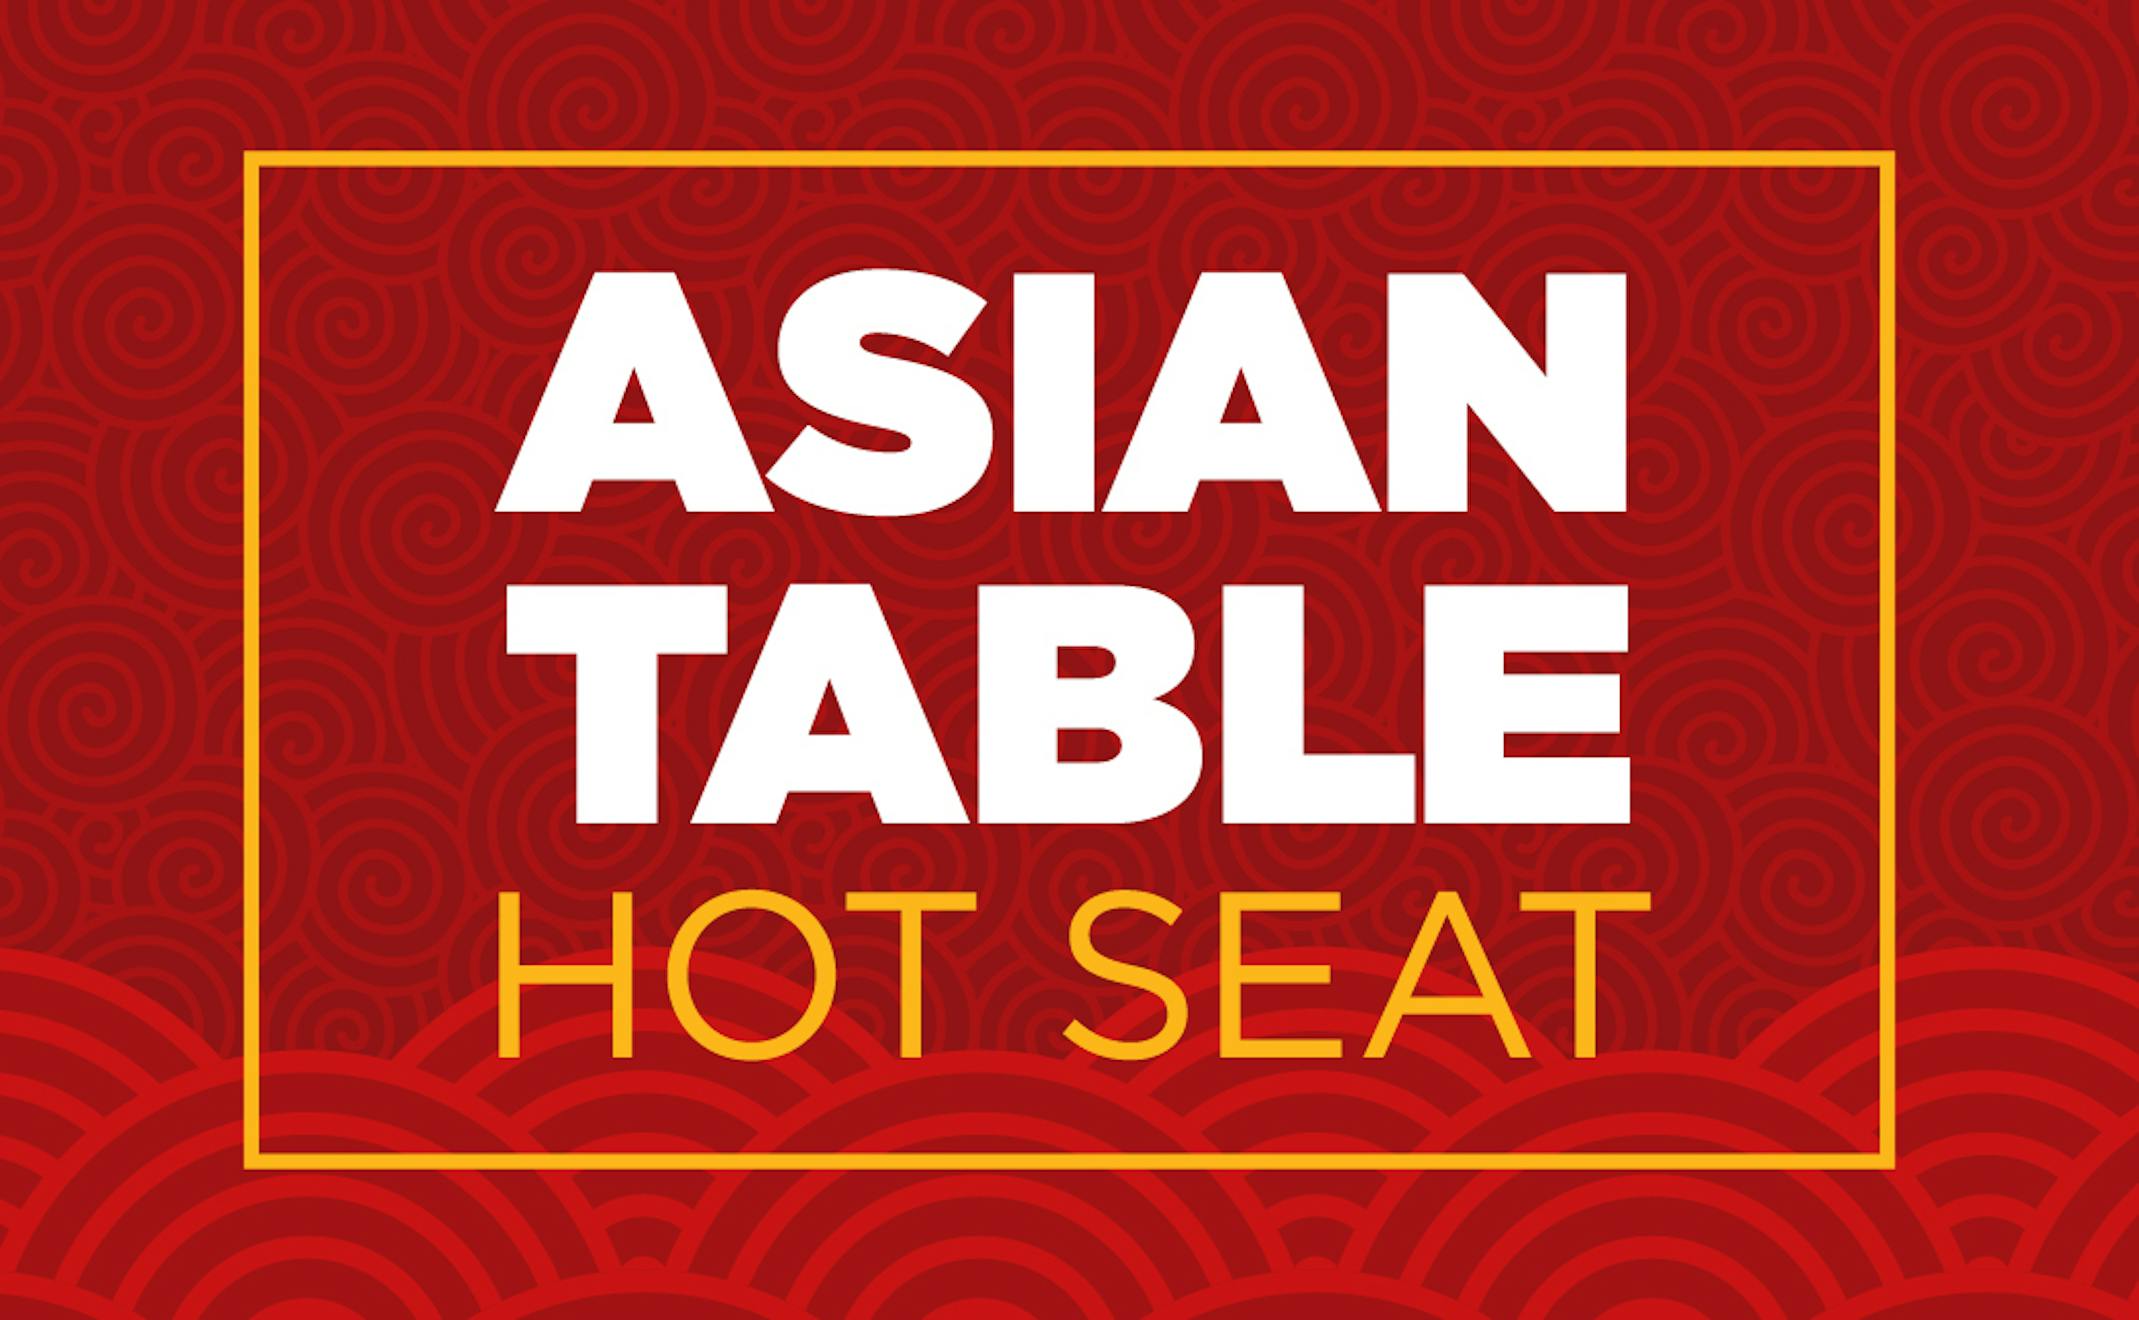 Asian Table Hot Seat Promotion August